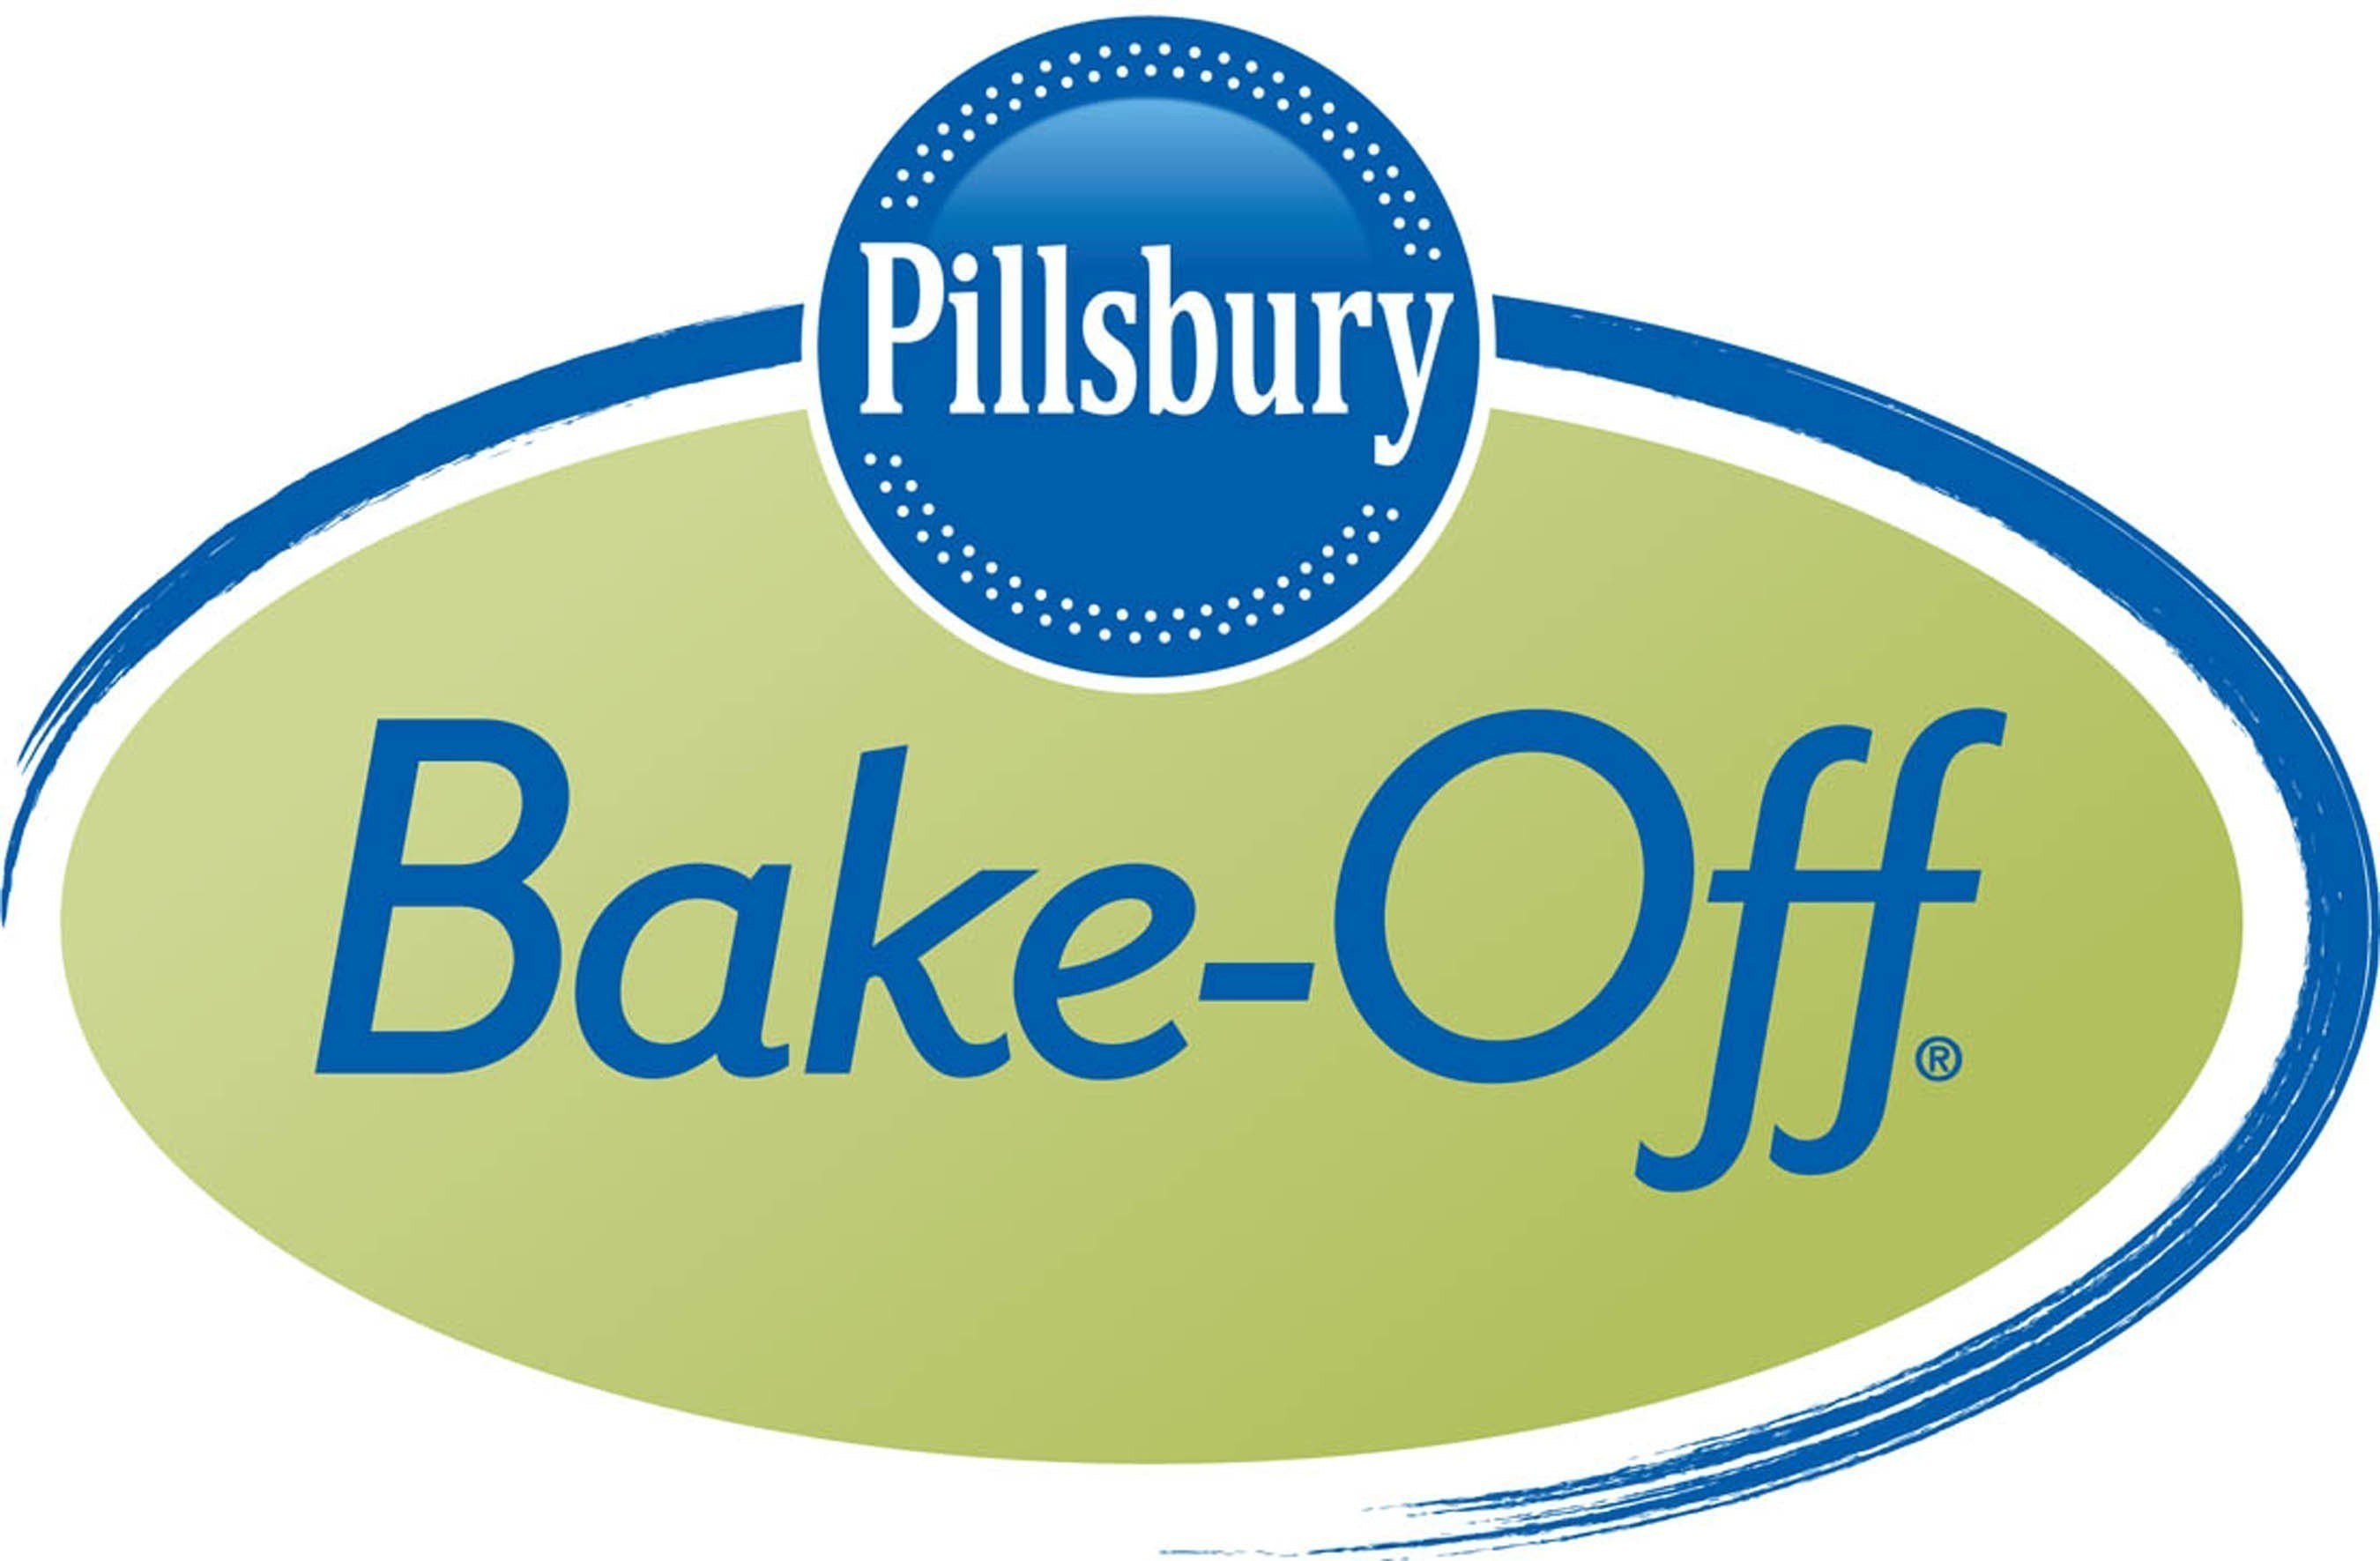 Who will win $1 million? Go to BakeOff.com to learn more!